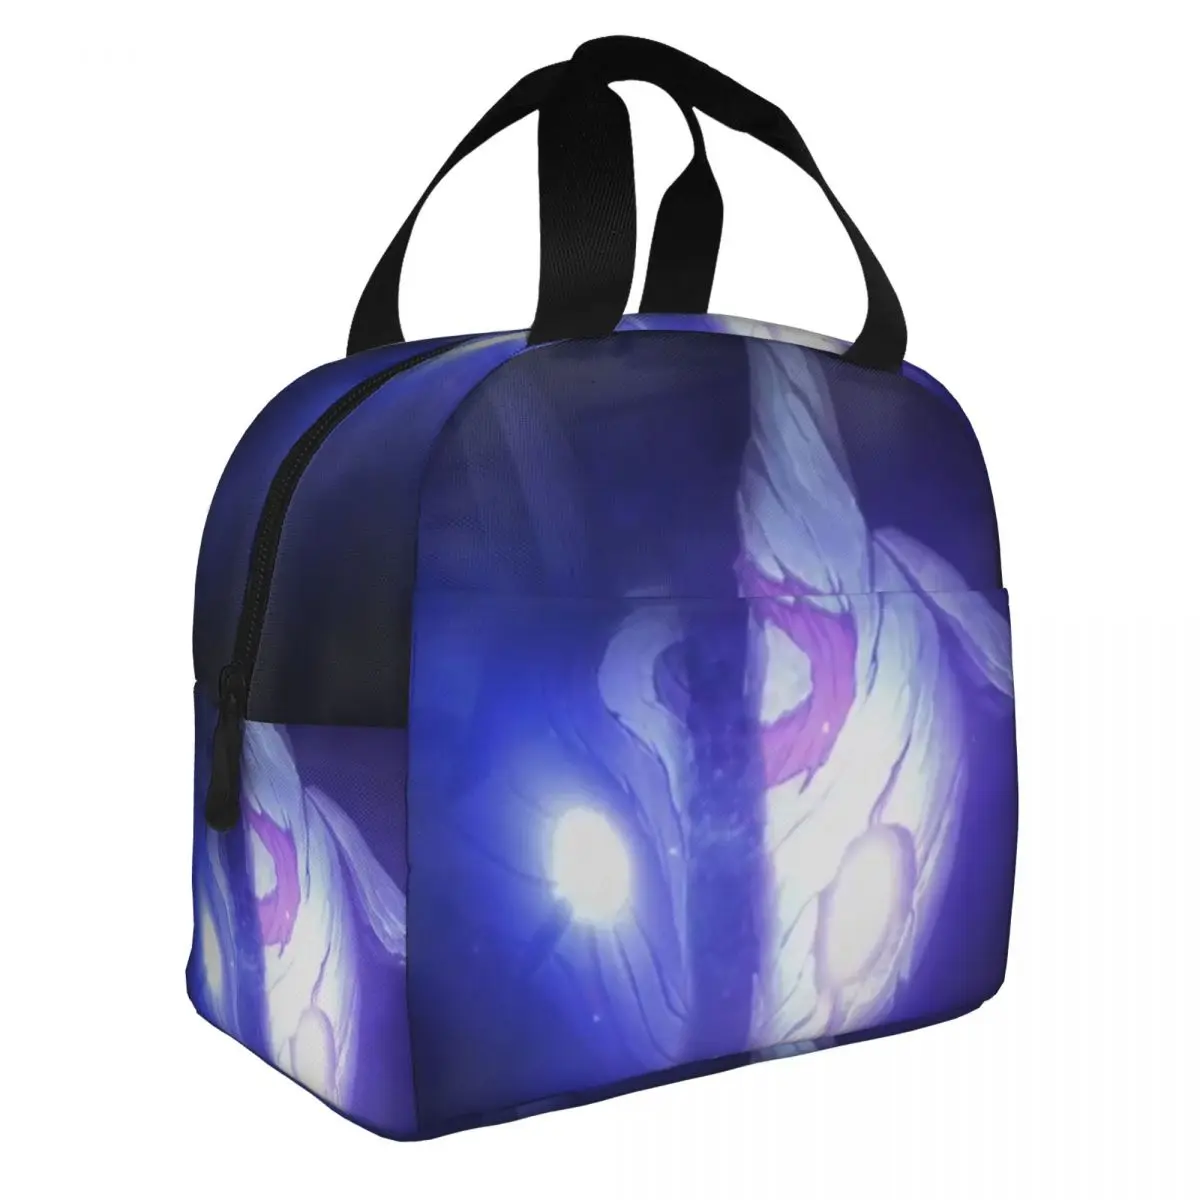 Kindred S - League Of Legends Lunch Bento Bags Portable Aluminum Foil thickened Thermal Cloth Lunch Bag for Women Men Boy